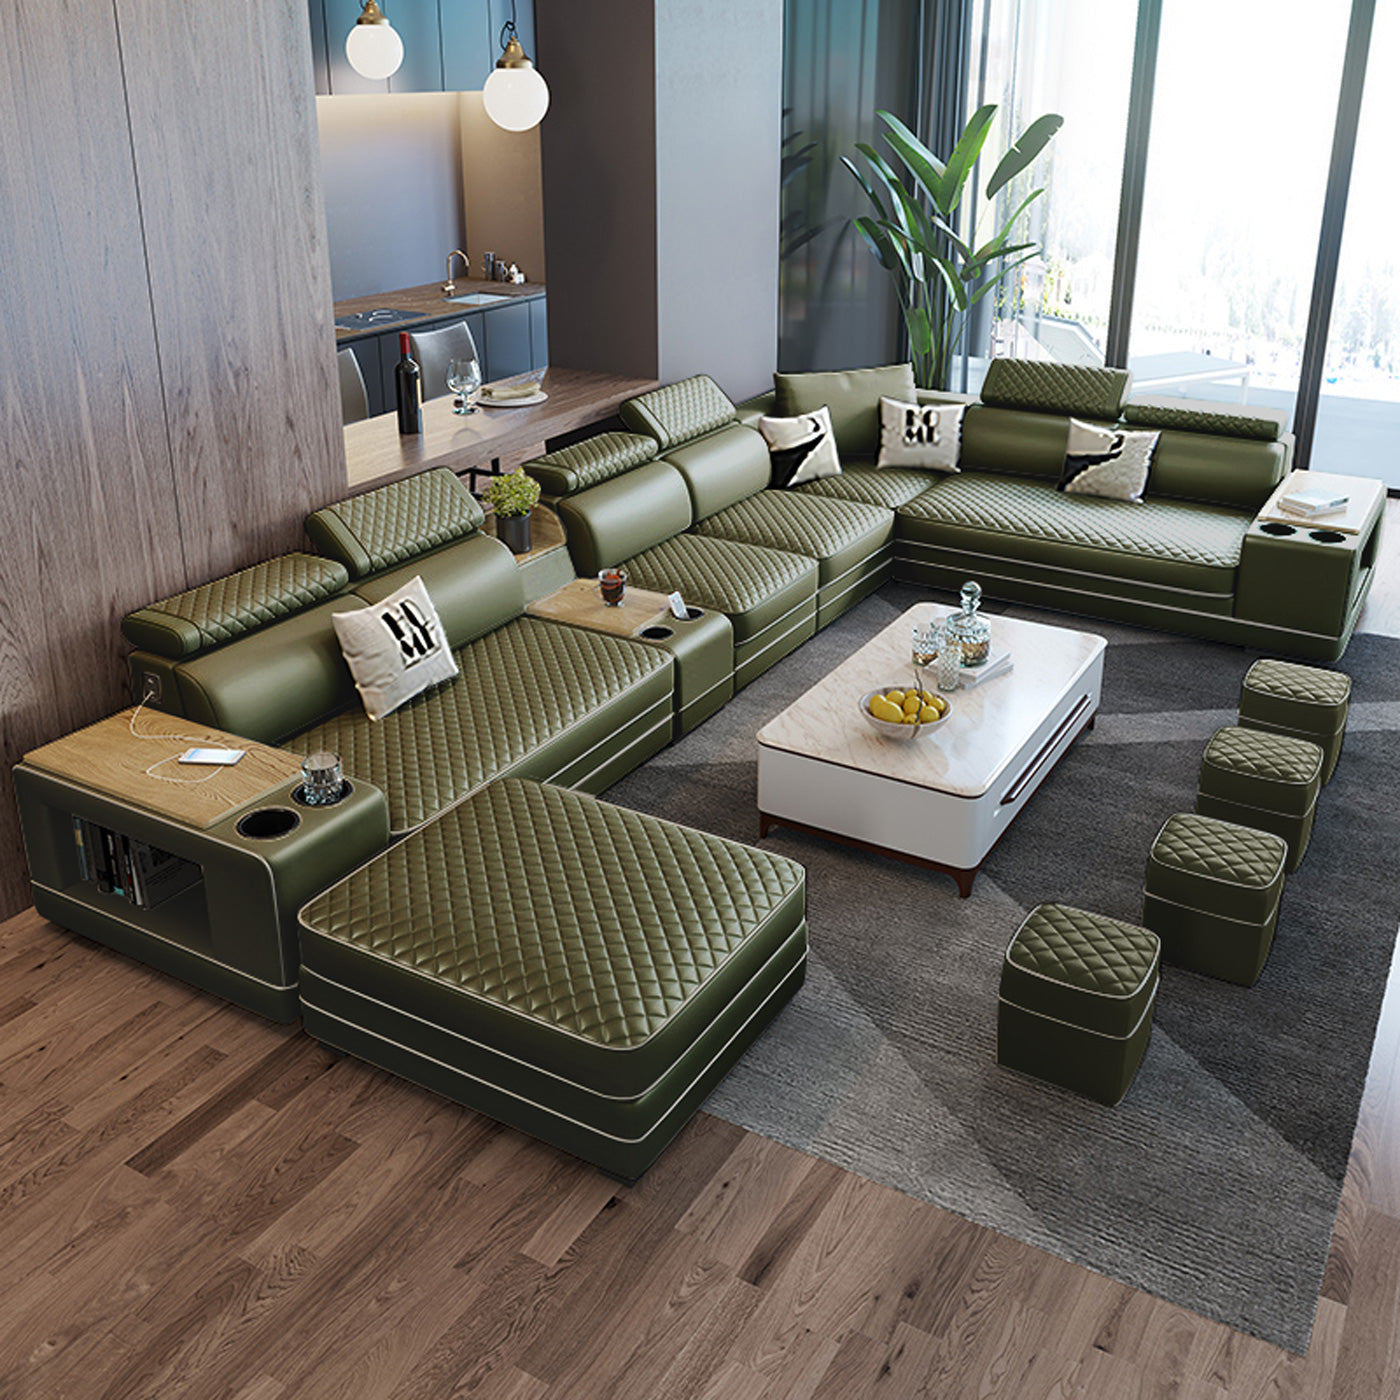 Apus Army Green & White Modular Tufted Sectional